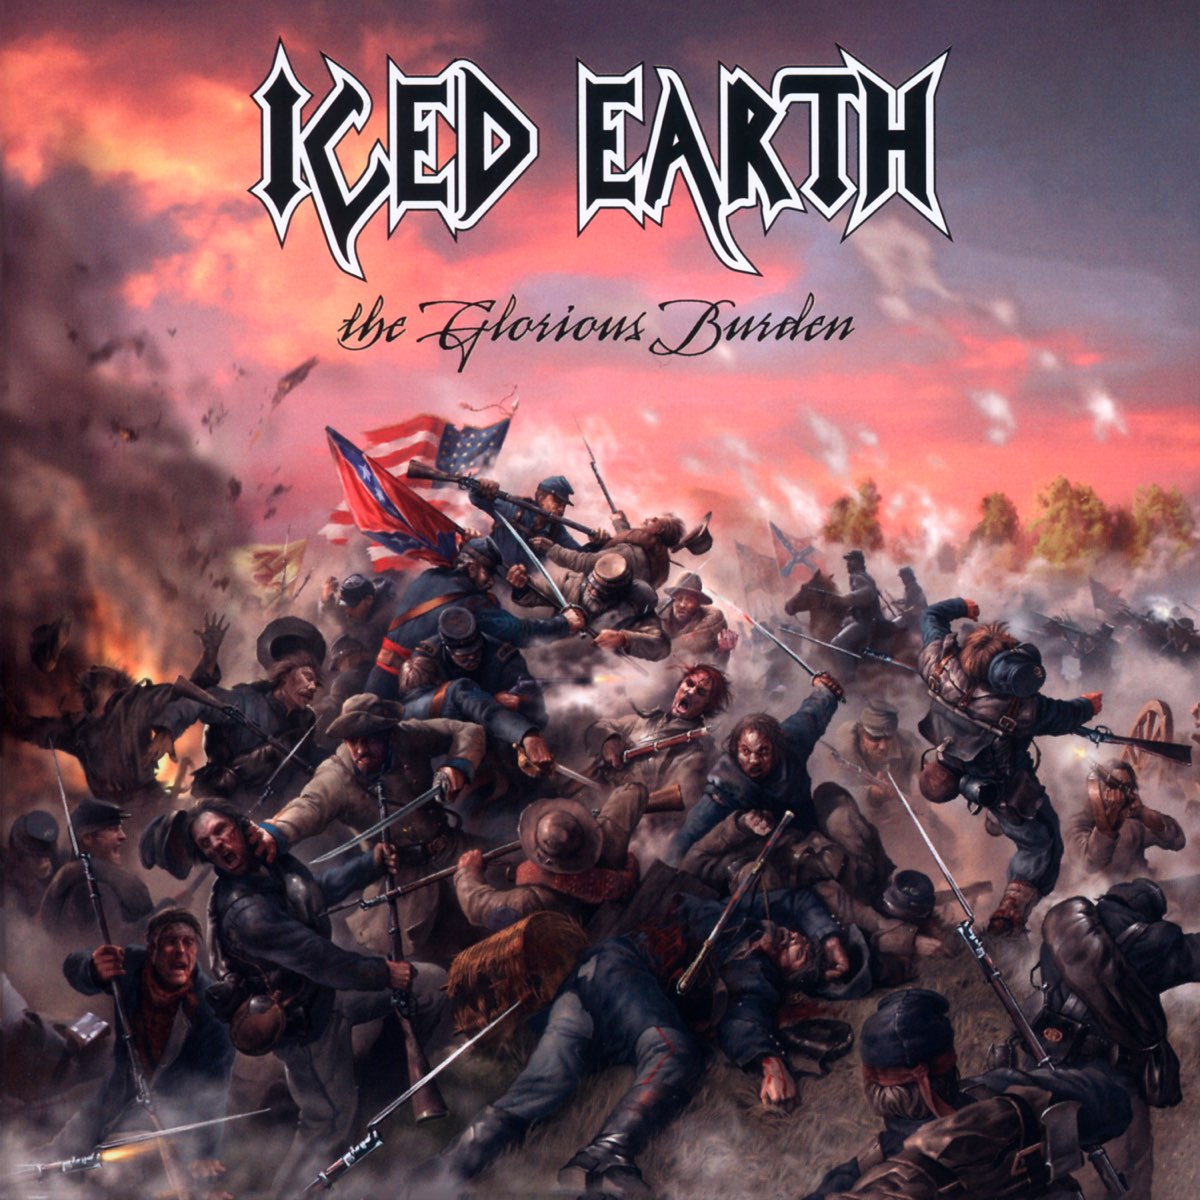 ‎The Glorious Burden by Iced Earth on Apple Music